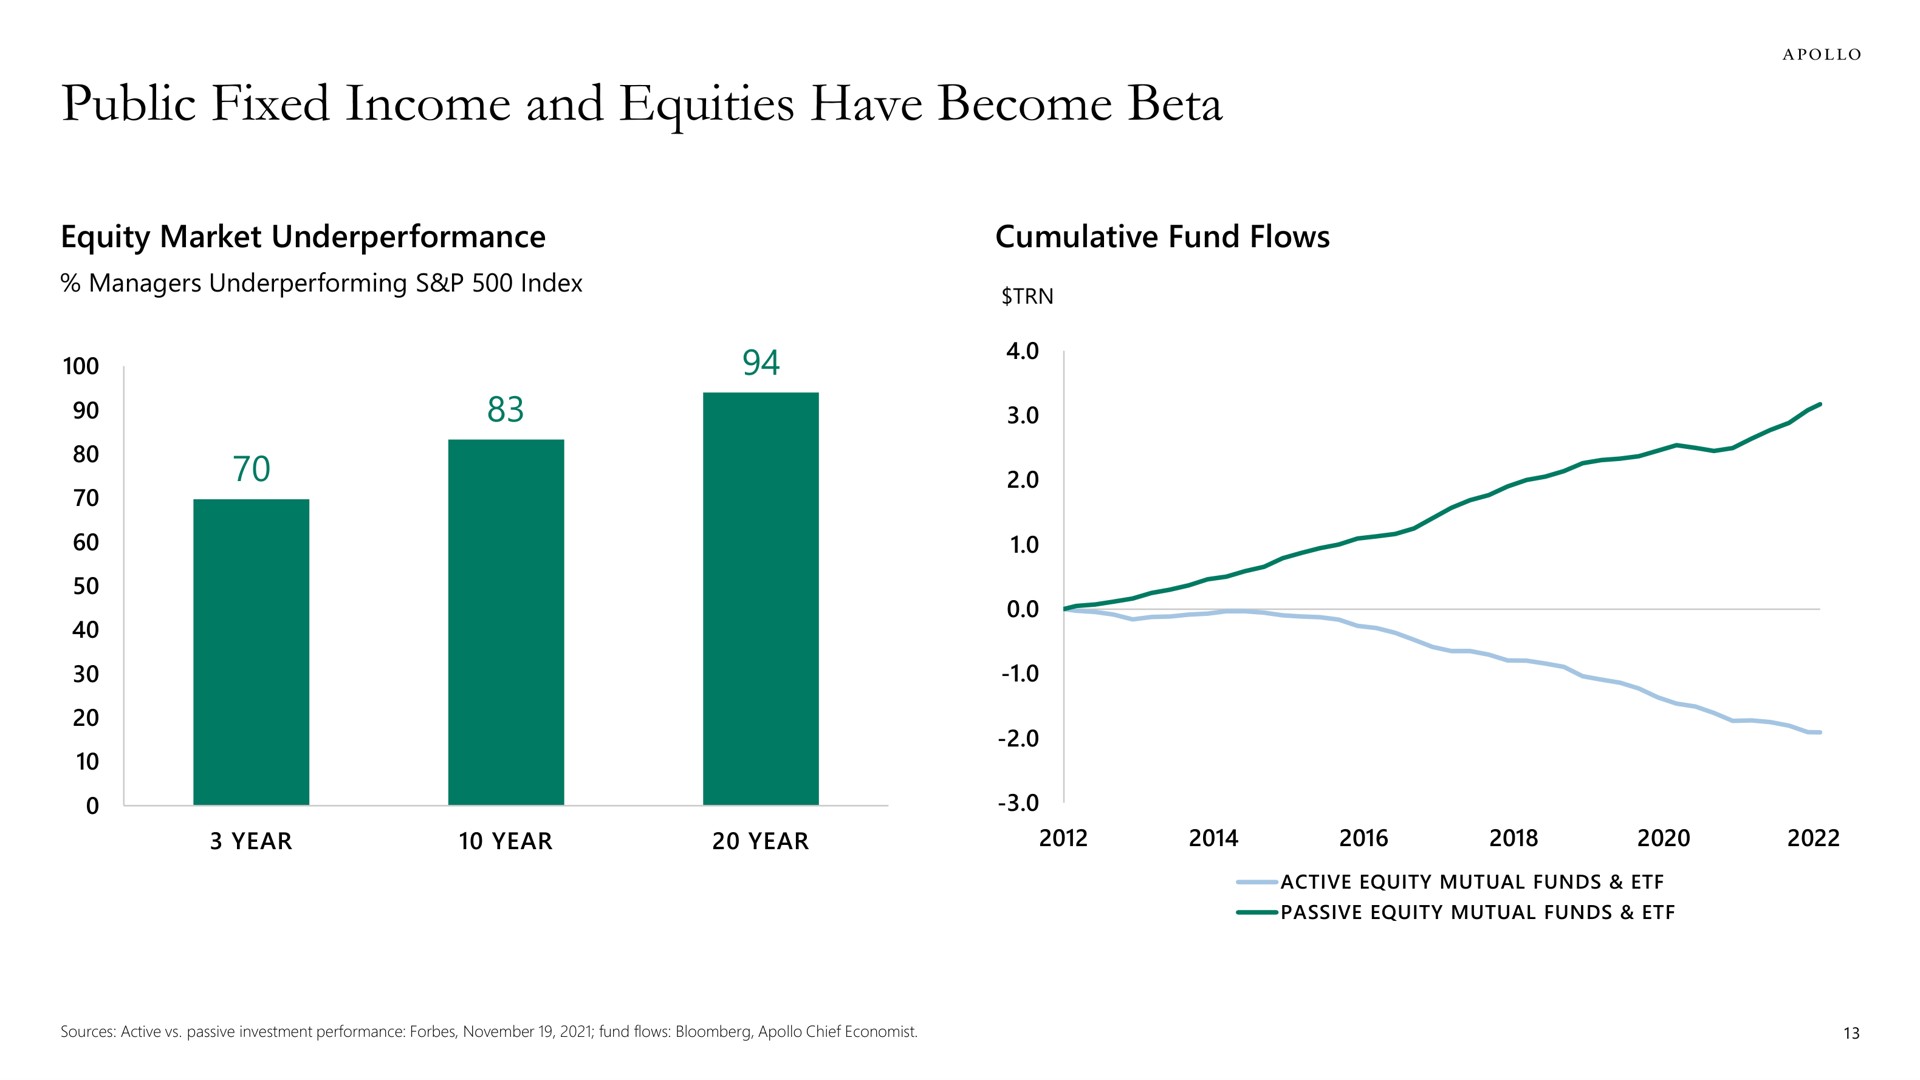 public fixed income and equities have become beta | Apollo Global Management